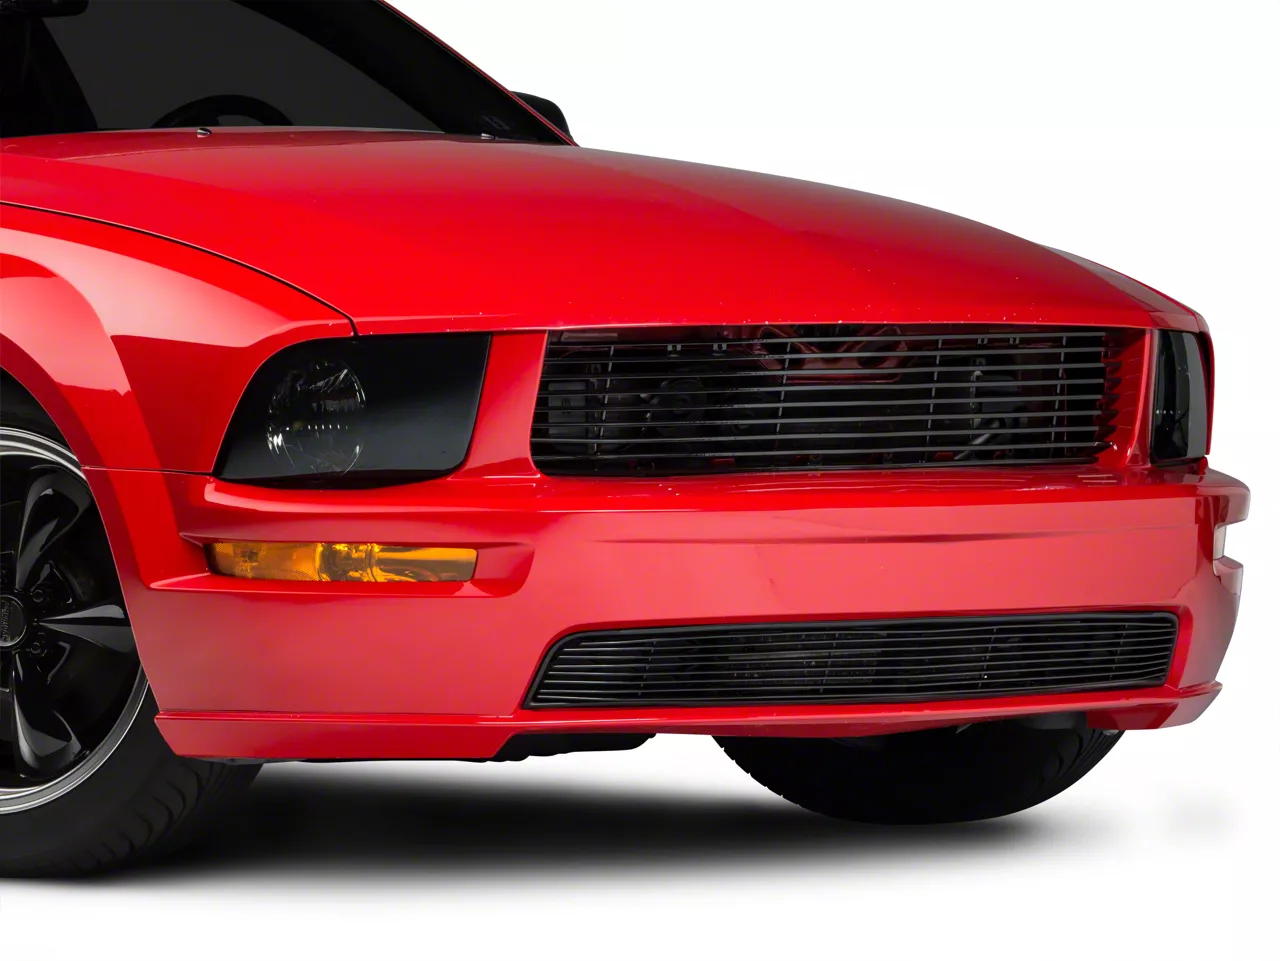 2005-2009 Mustang Exterior Styling | AmericanMuscle